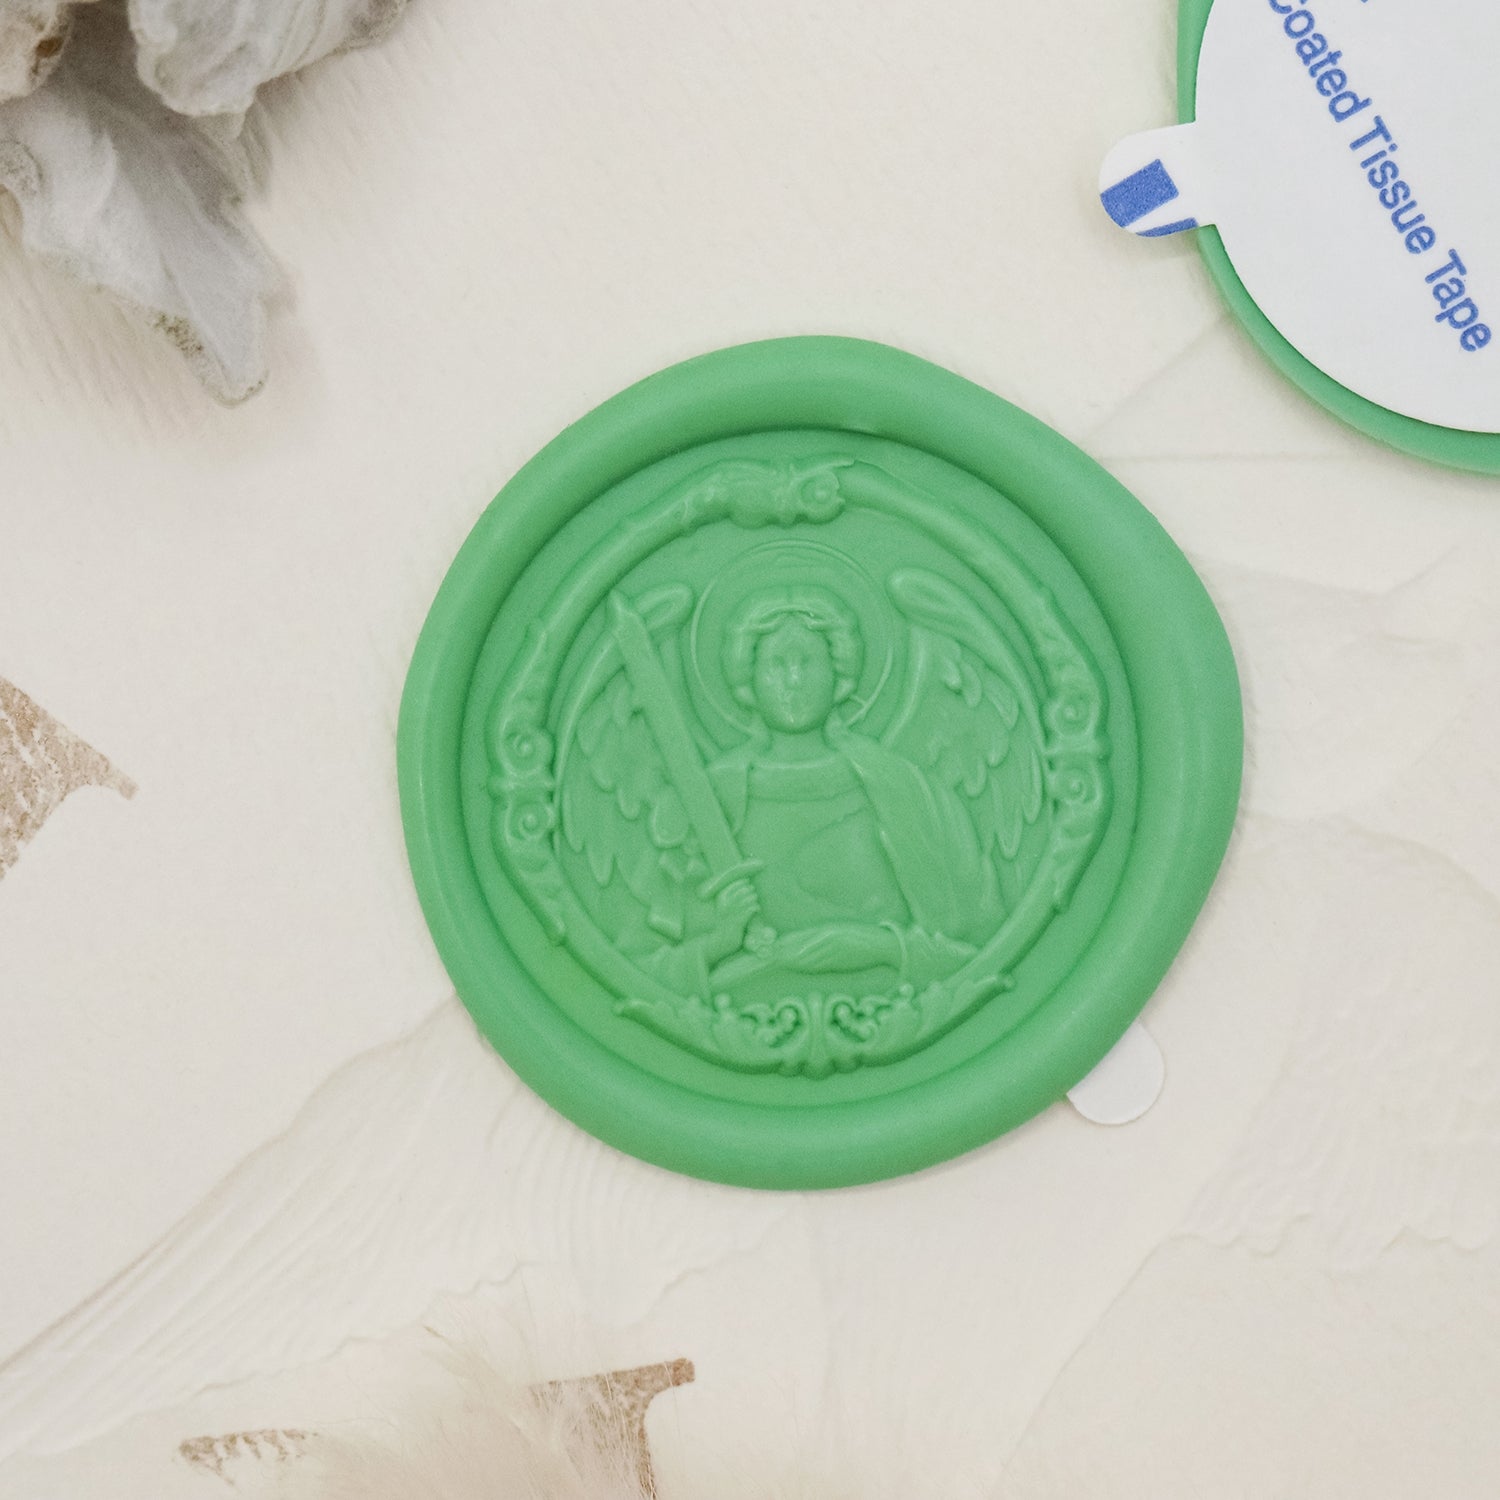 Stamprints 3D Relief Archangel Michael Self-adhesive Wax Seal Stickers 1